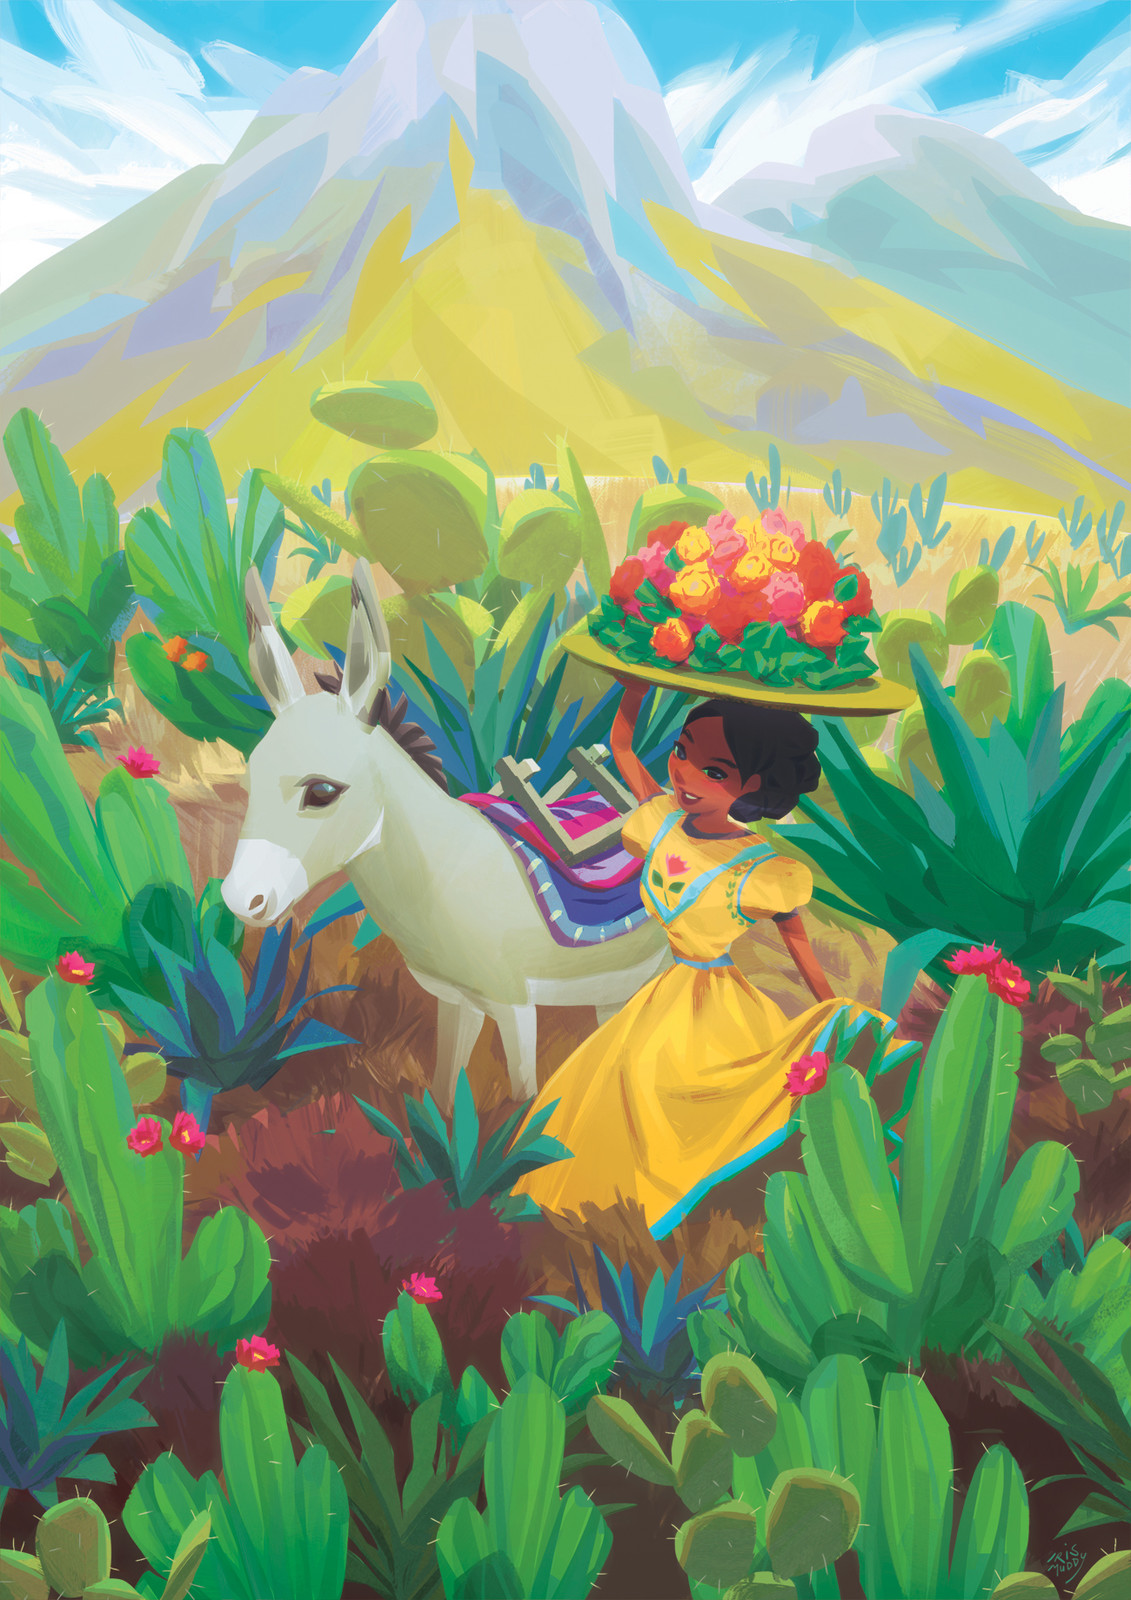 piece for the collective kokoro charity project, based on mexico this year~